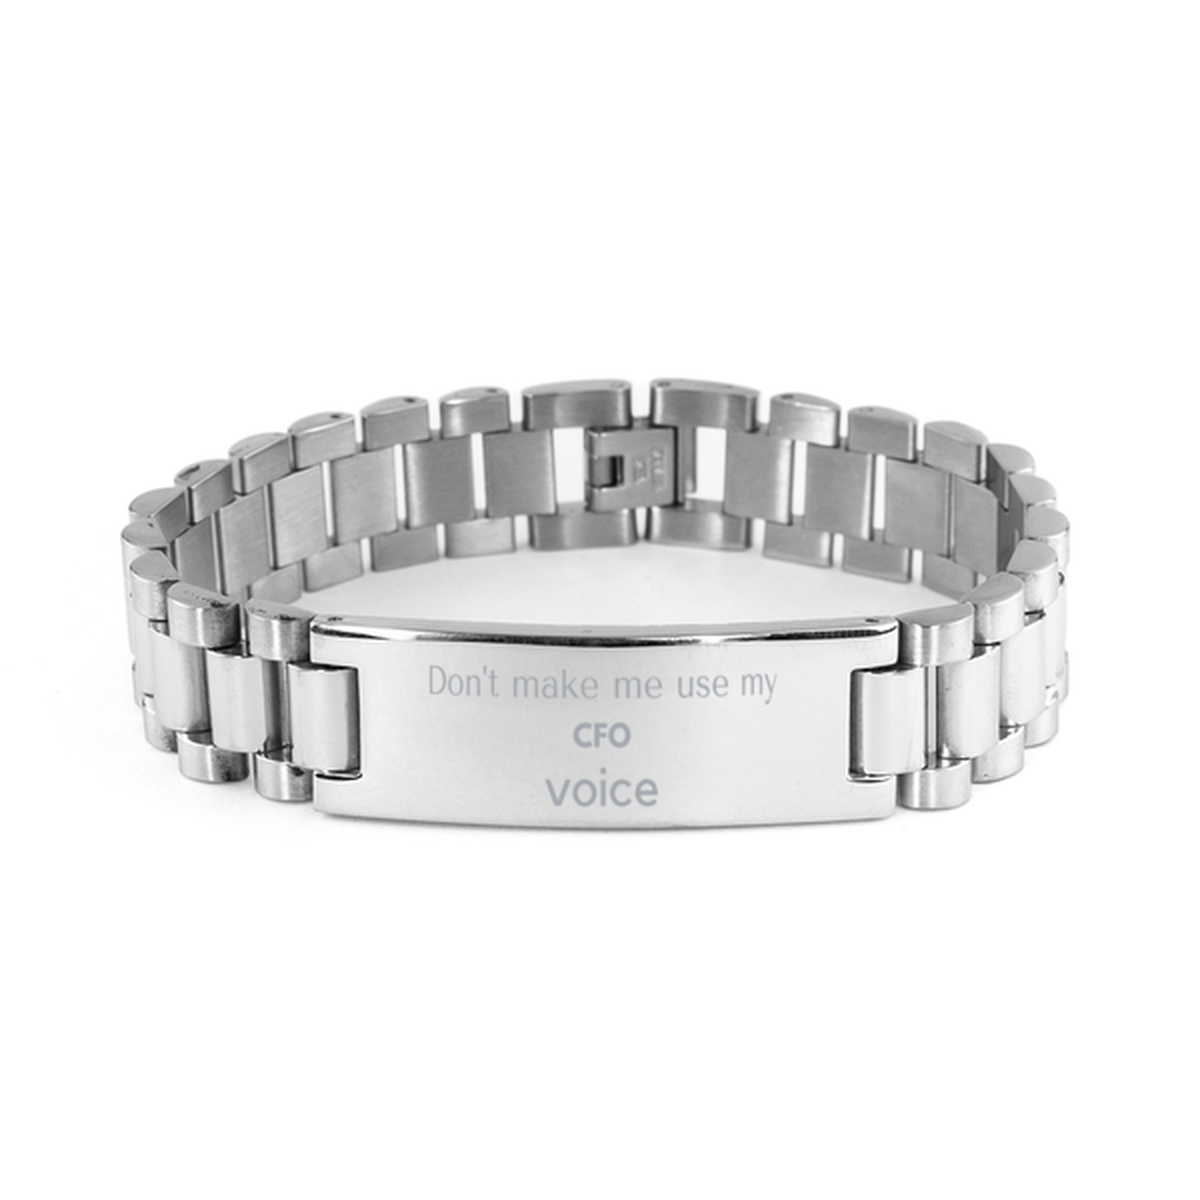 Don't make me use my CFO voice, Sarcasm CFO Gifts, Christmas CFO Ladder Stainless Steel Bracelet Birthday Unique Gifts For CFO Coworkers, Men, Women, Colleague, Friends